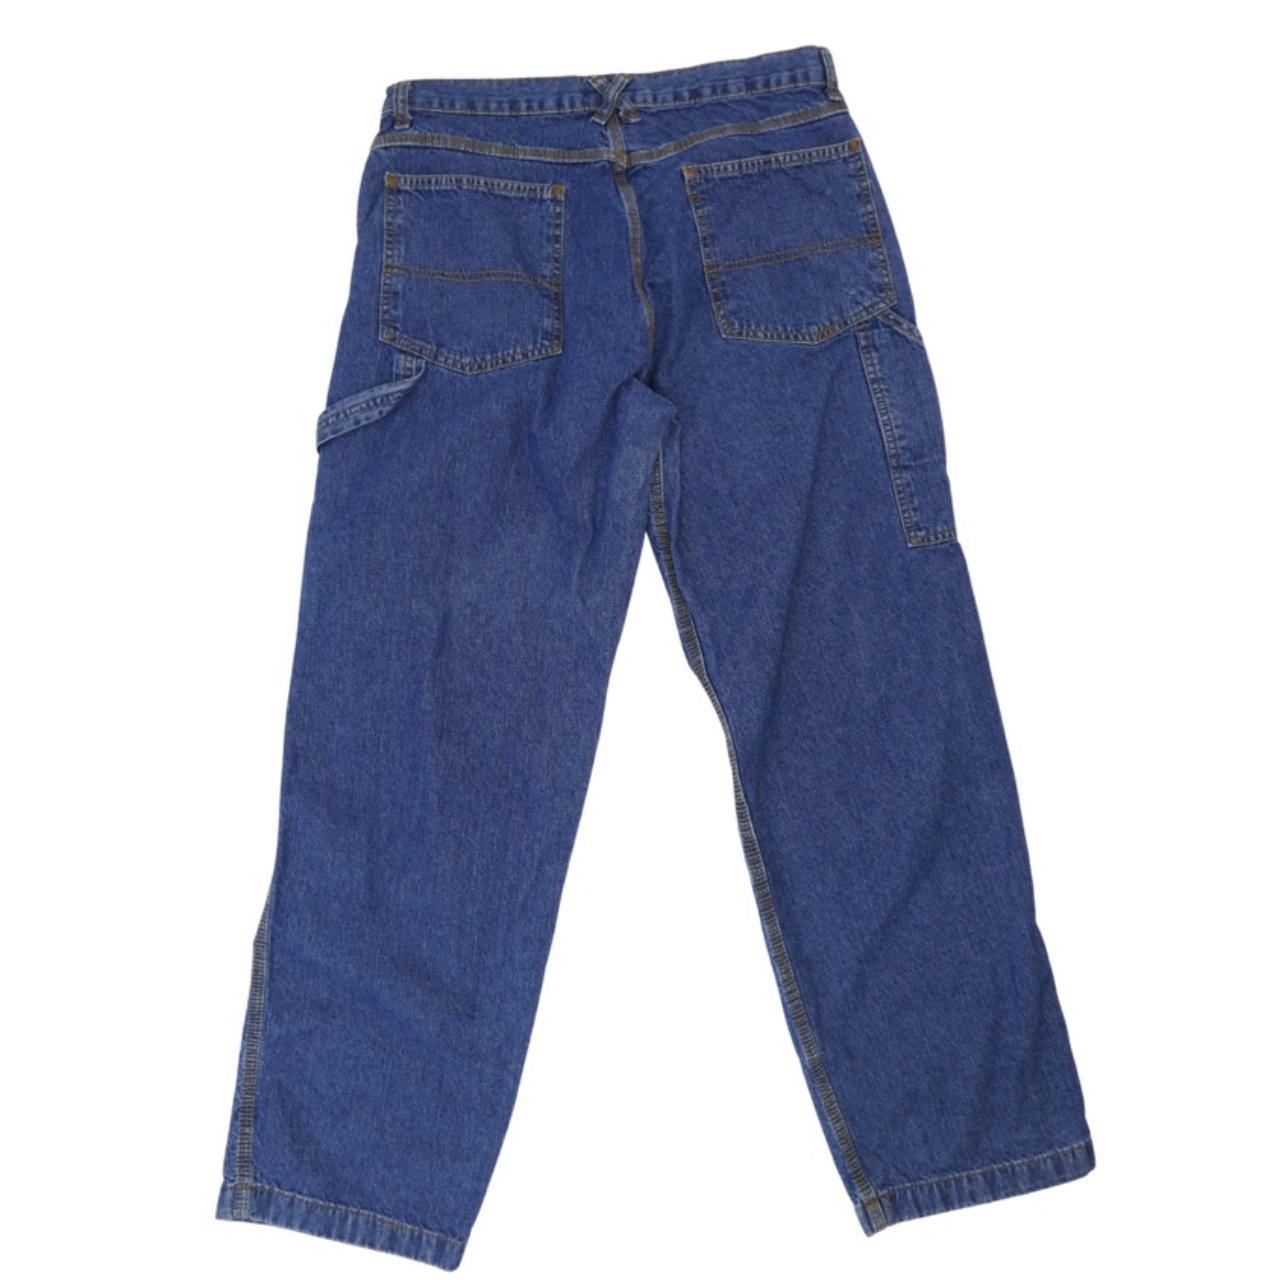 Buy AMISH Jeans Baggy - Denim At 33% Off | Editorialist